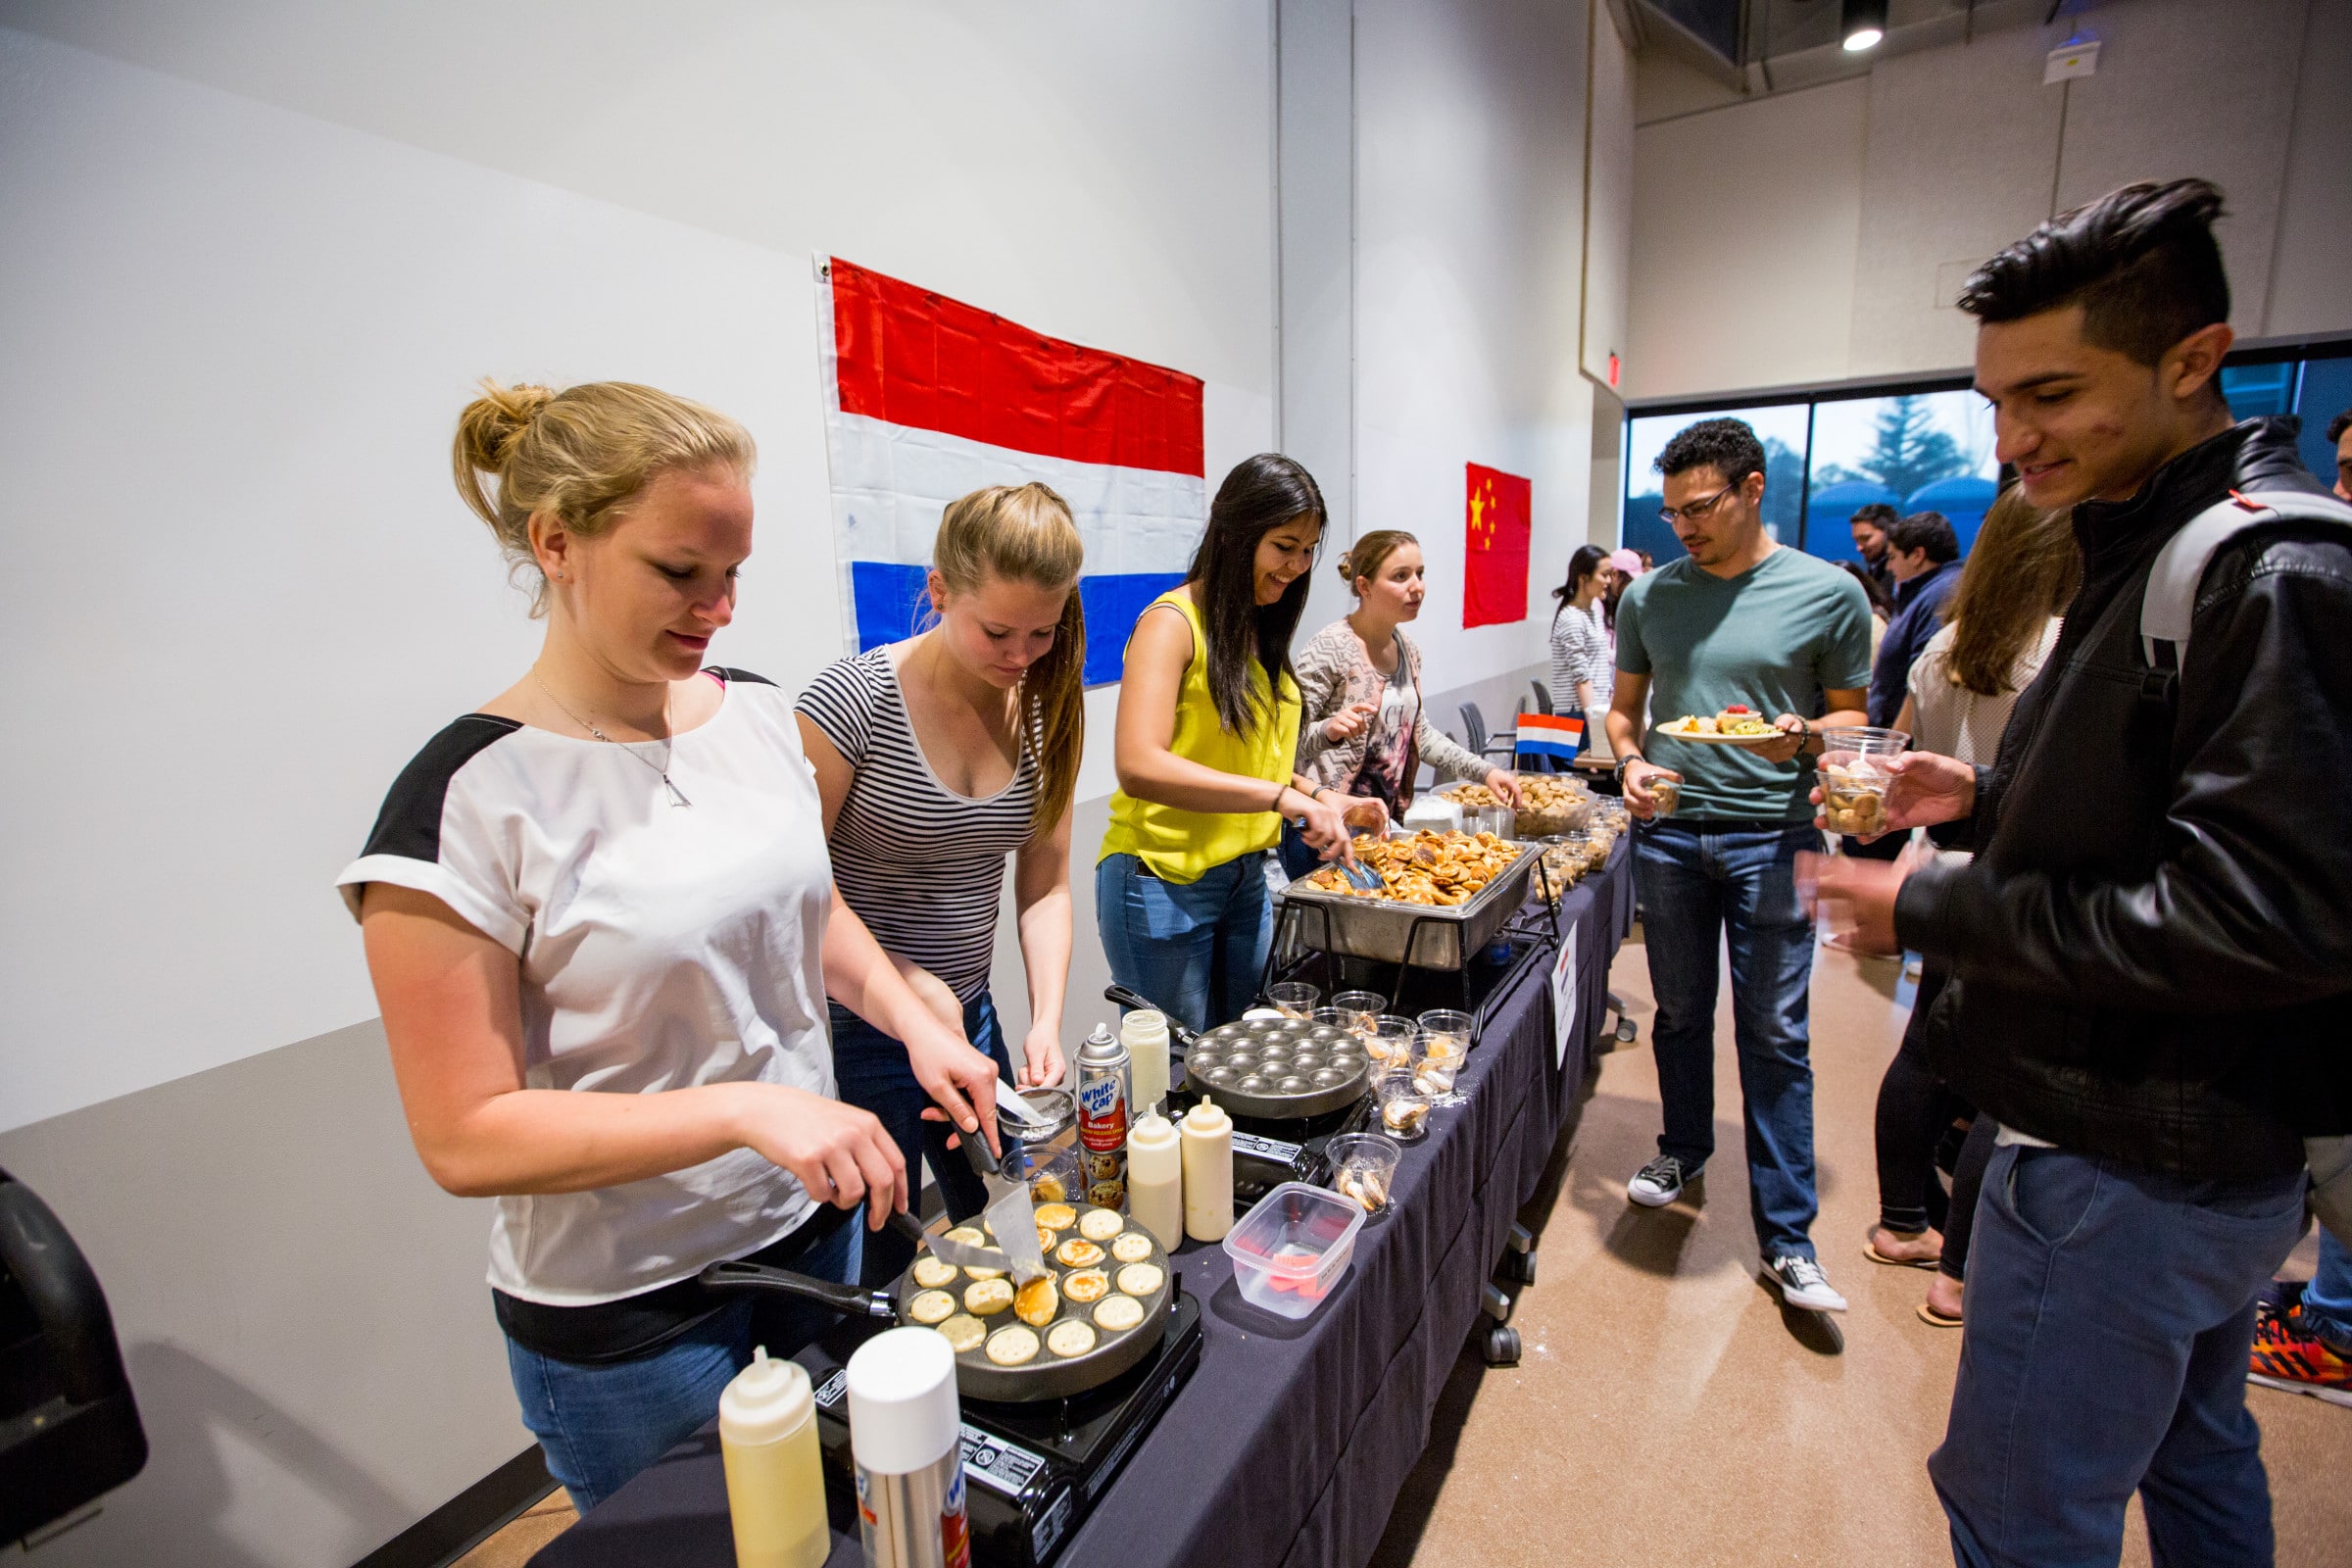 Students serve traditional food in a buffet line.